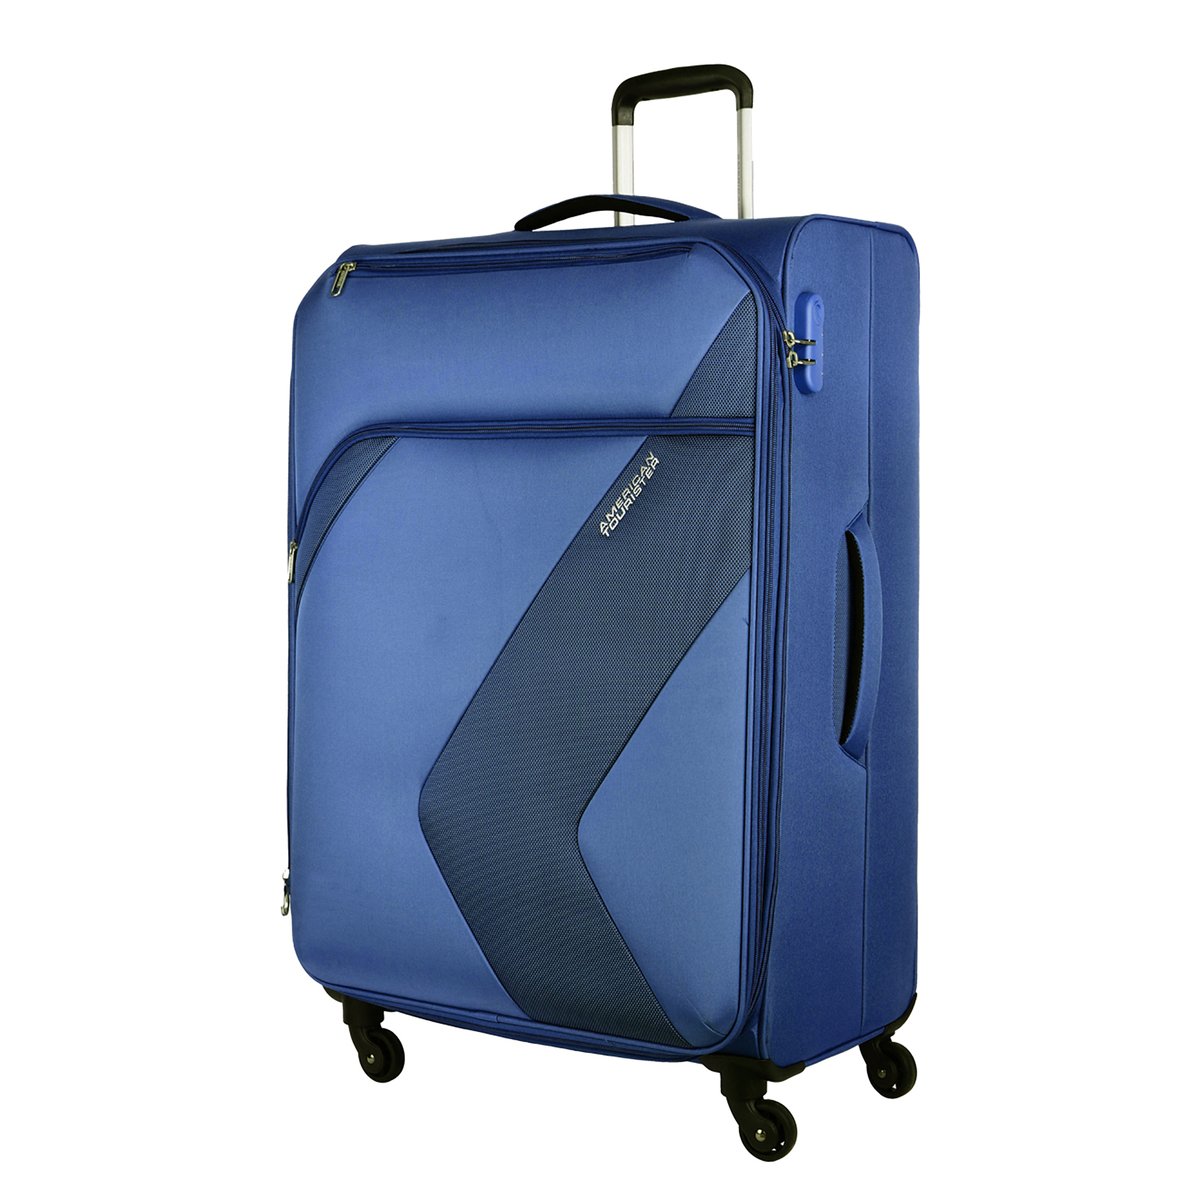 American Tourister Stanford 4 Wheel Soft Trolley, 78 cm, Navy